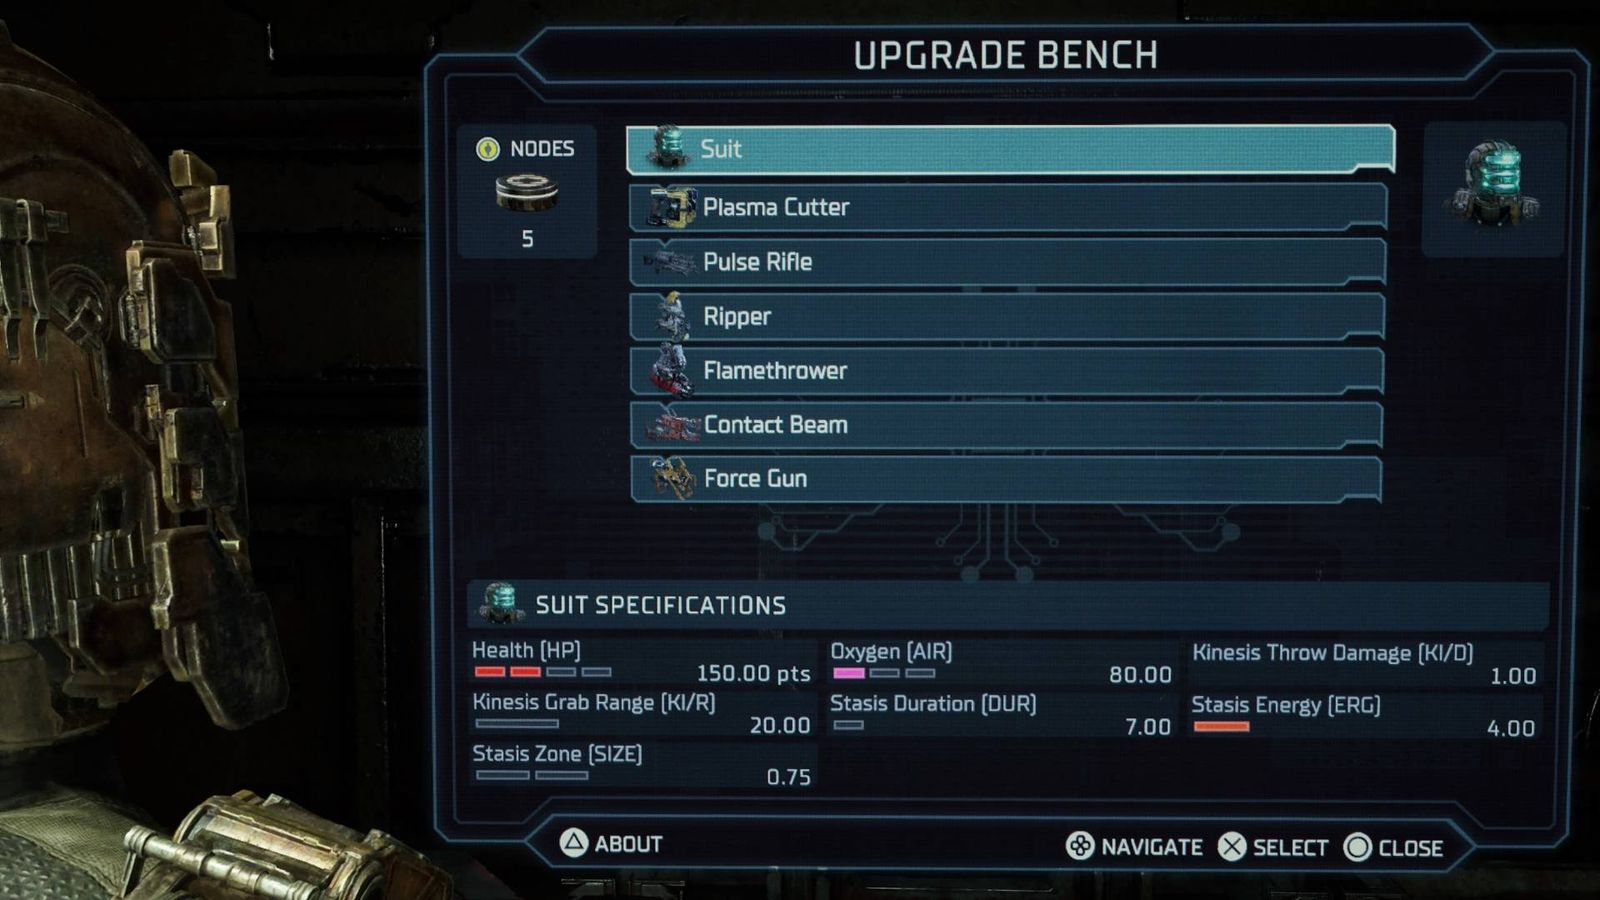 Image of the Upgrade Bench menu in the Dead Space remake.